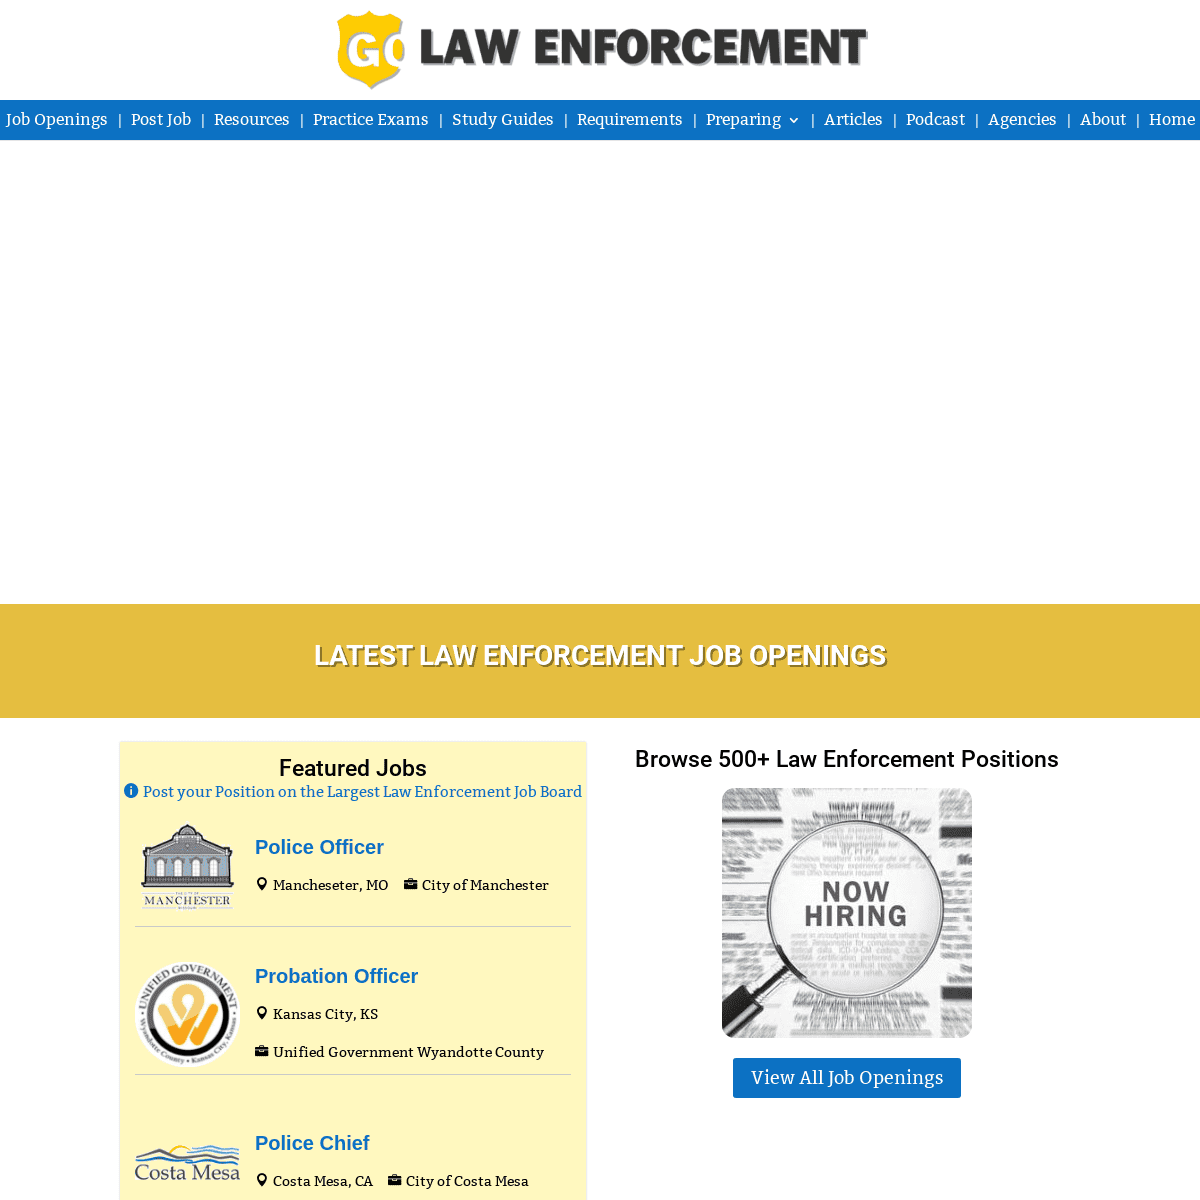 A complete backup of https://golawenforcement.com